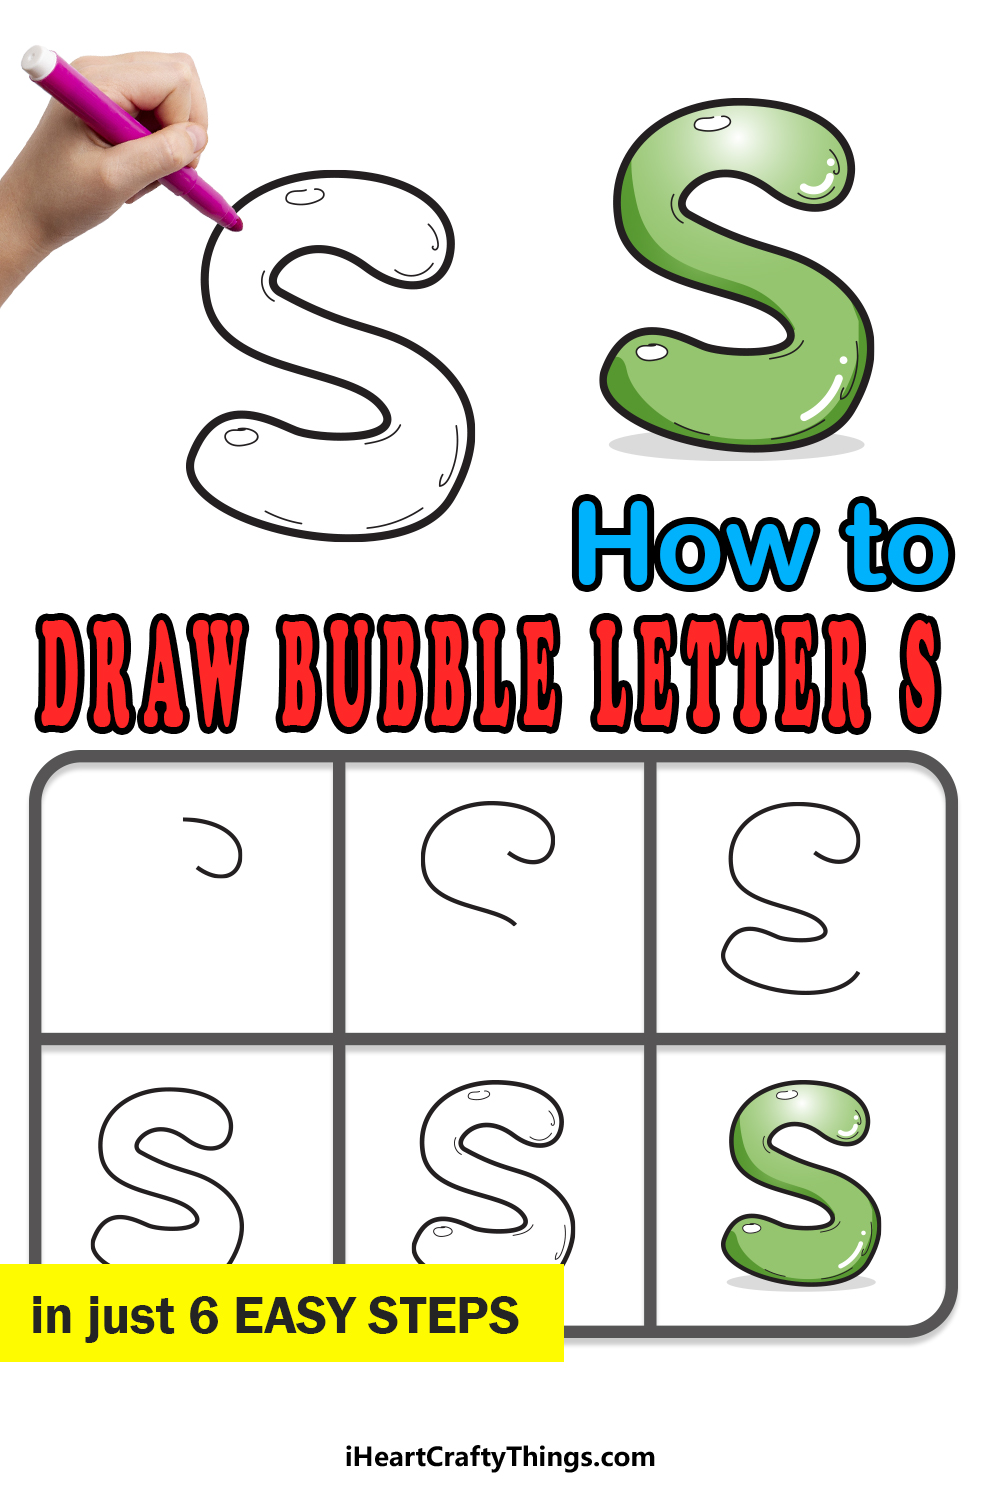 How To Draw Your Own Bubble S step by step guide